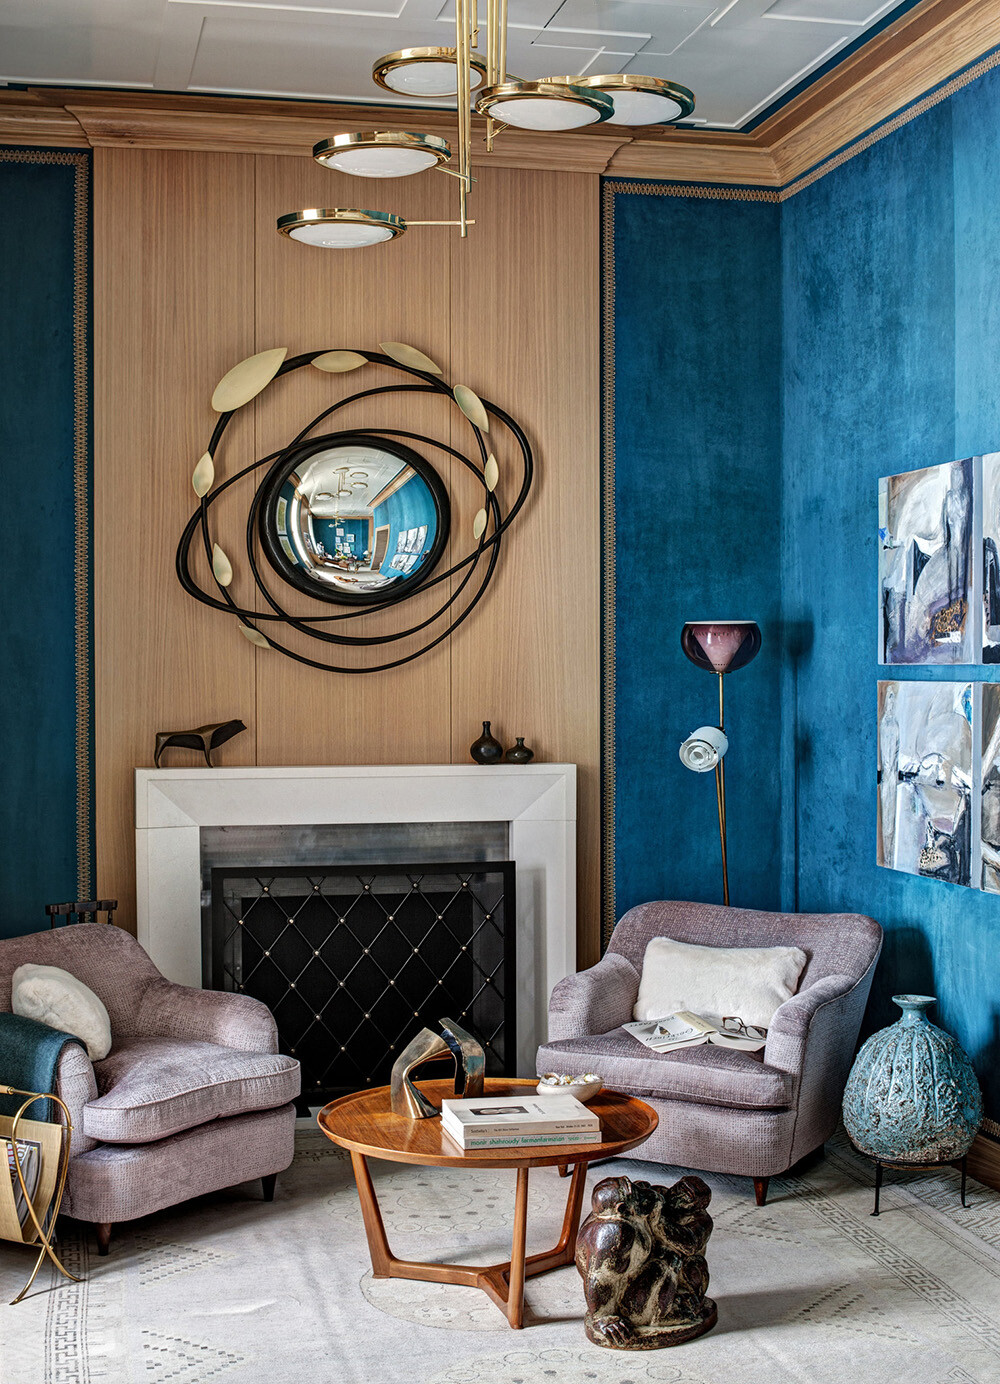 Painting Room With Hues Of Blue - www.homeworlddesign. com (11)